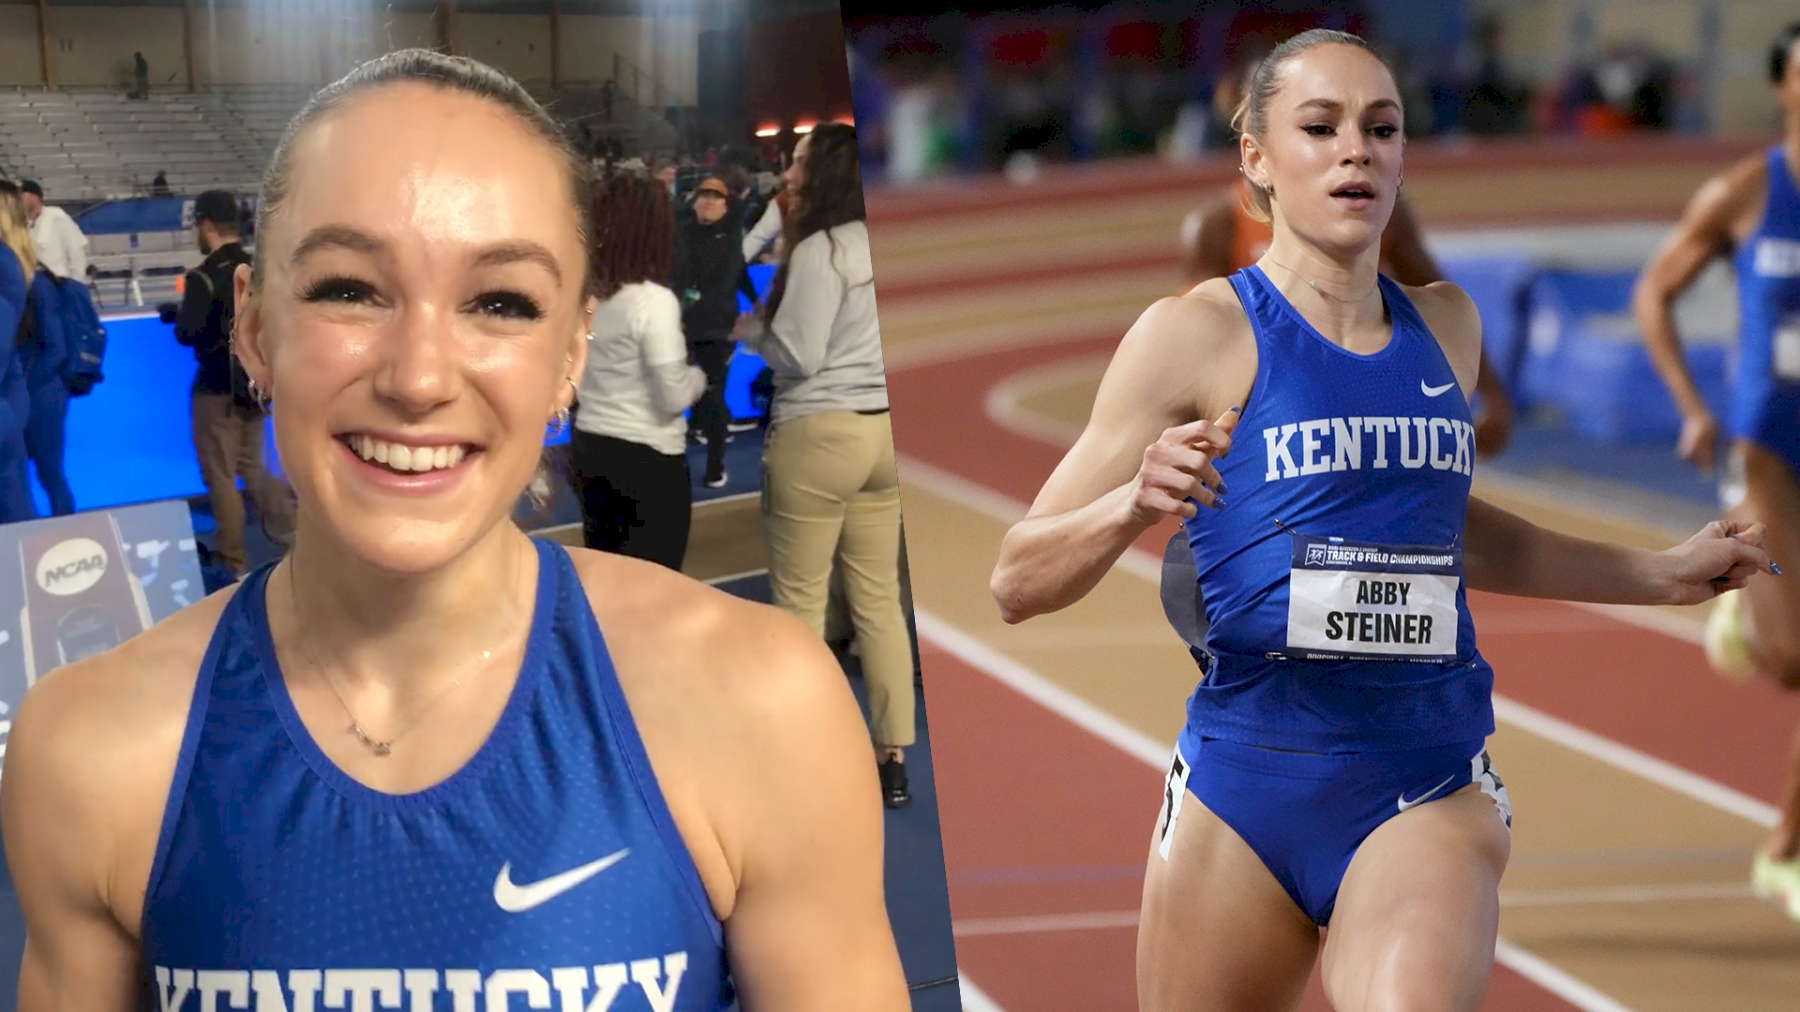 Kentucky's Abby Steiner Wins 200m NCAA Title Hopes For Sub22 This